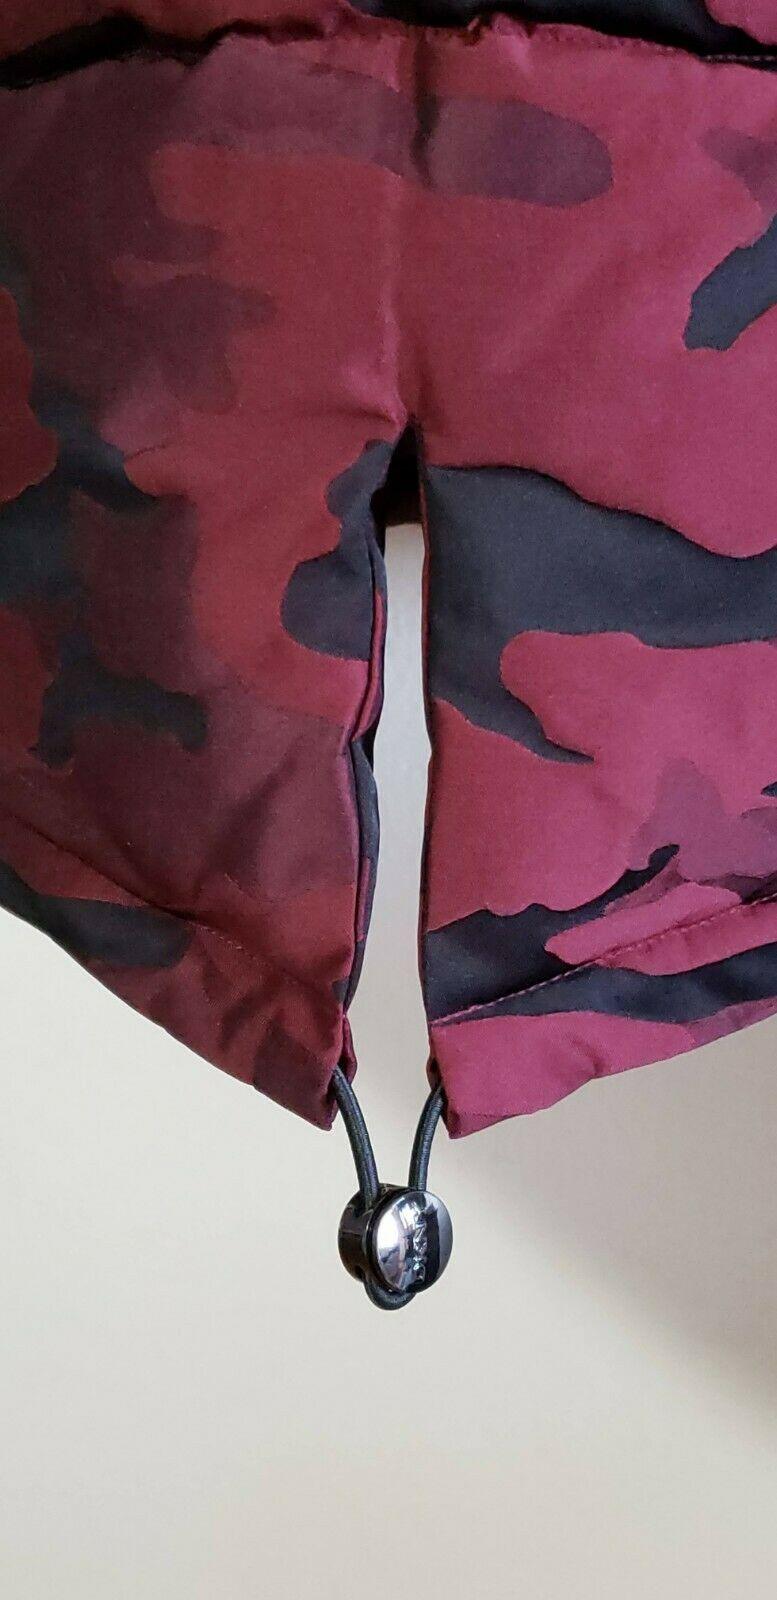 DKNY Womens Camo Red Black Faux Fur Trim Hooded Coat Puffer Size S - SVNYFancy